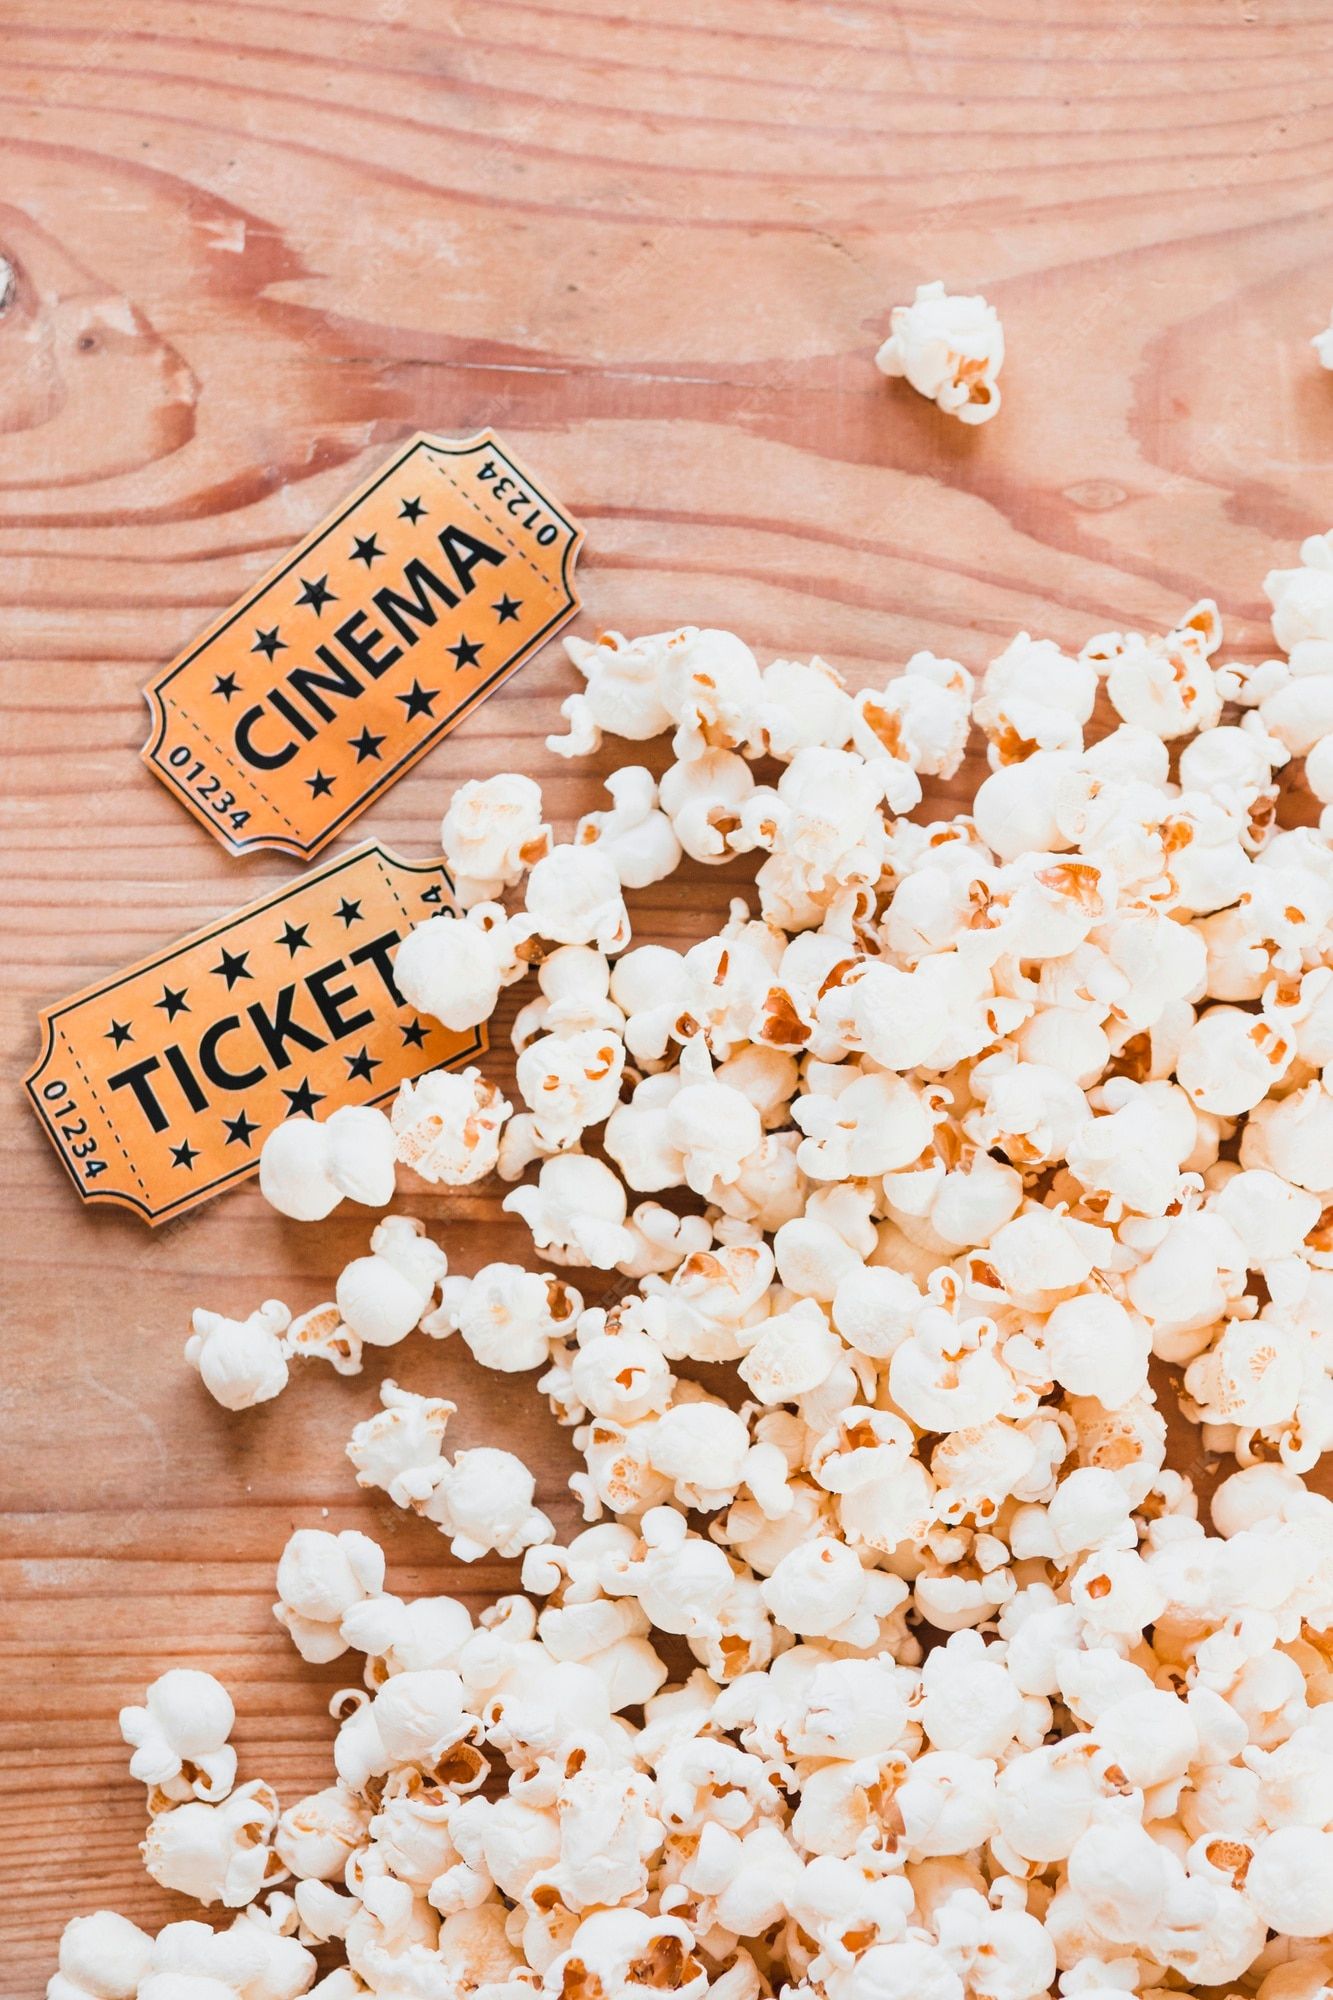 Popcorn and cinema tickets on a wooden table - Popcorn